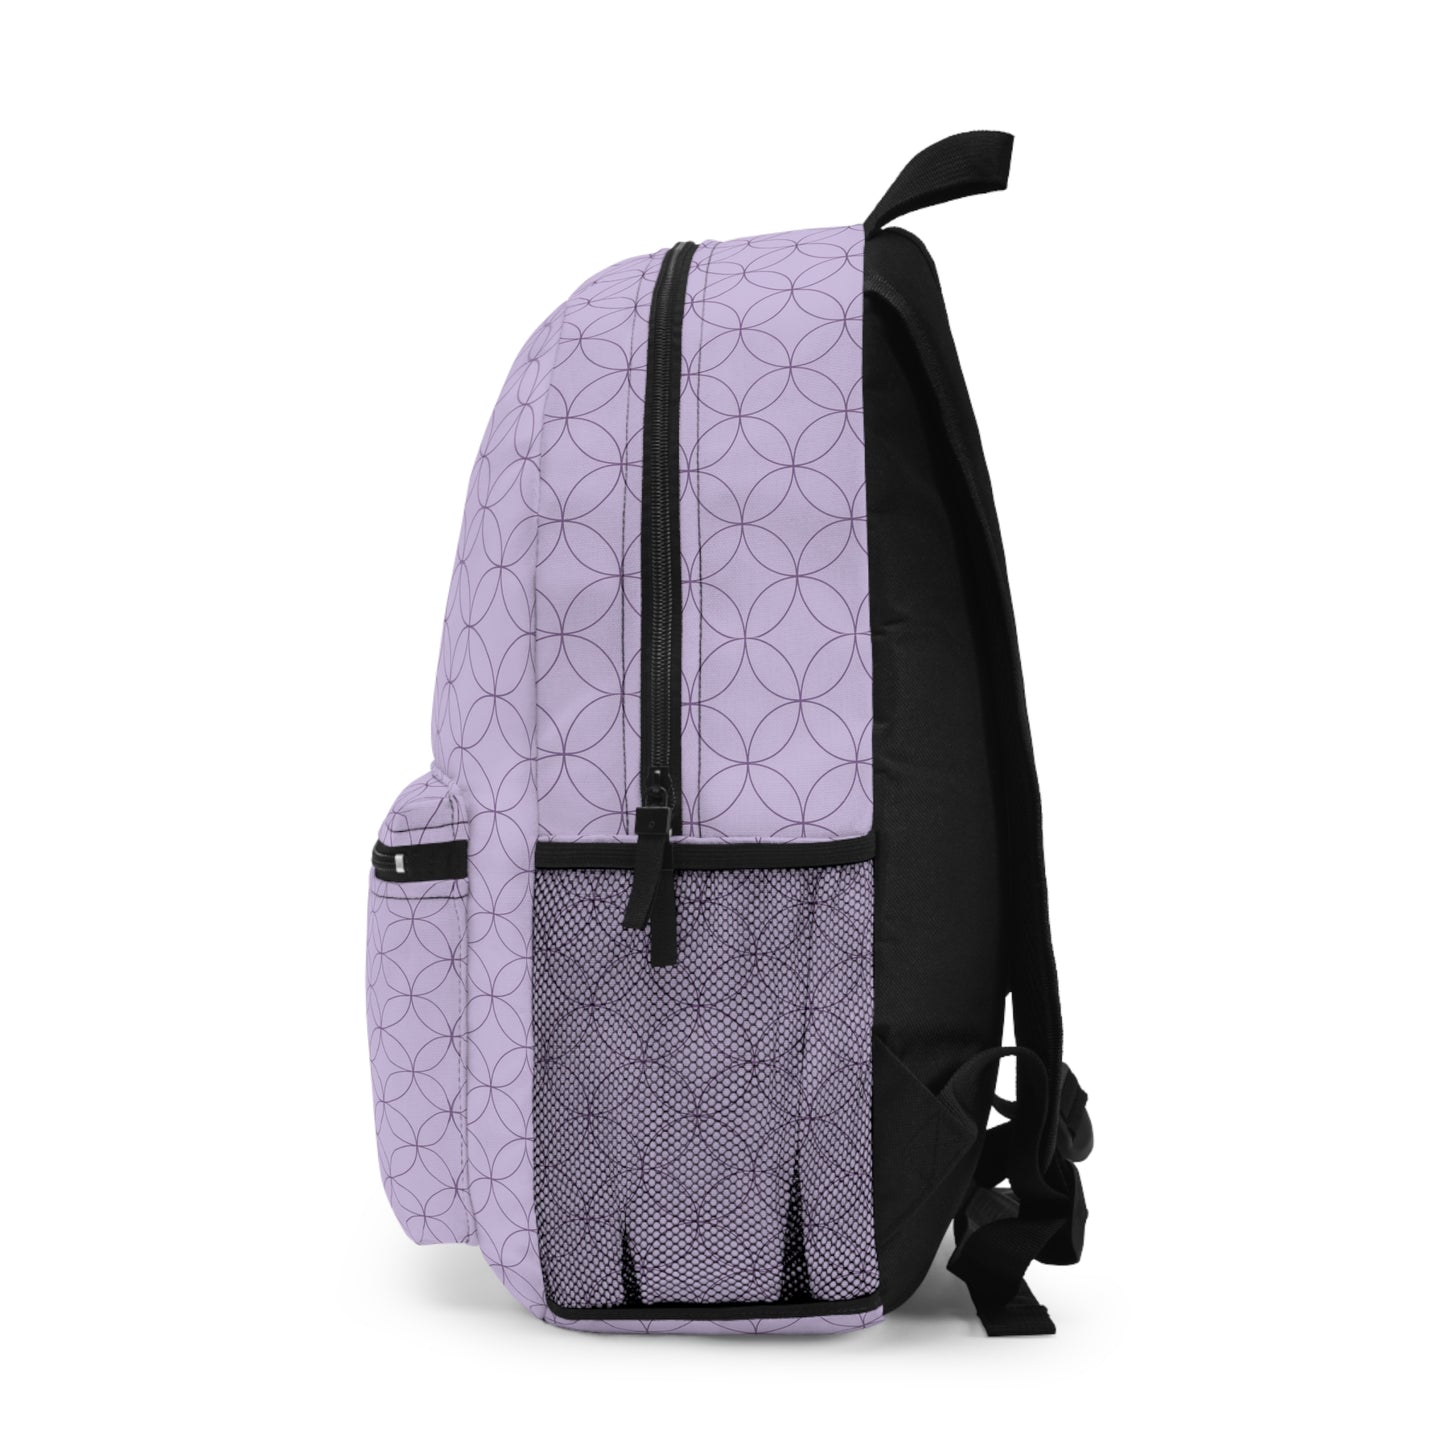 view of water bottle holder on side of the girls purple geometric backpack